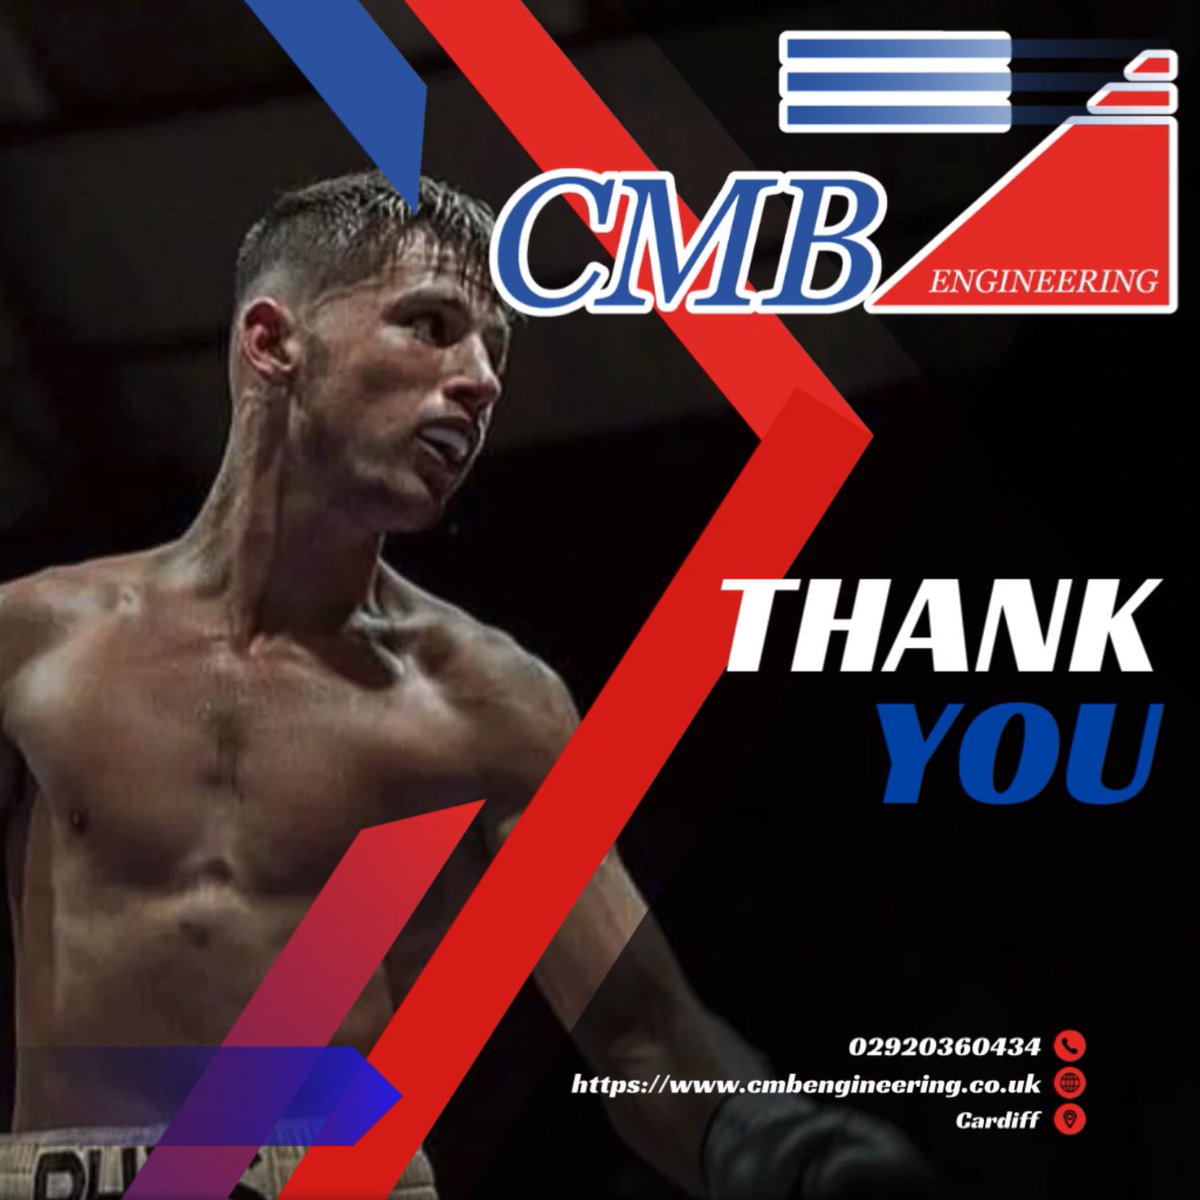 CMB are proud to be sponsoring Welsh boxer, Rhys Edwards, in his fight tomorrow in the @UtilitaArenaCDF for the WBA Inter-continental featherweight title - live on Sky Sports. We're proud to extend our long history of supporting Welsh sport and we wish Rhys the best of luck!